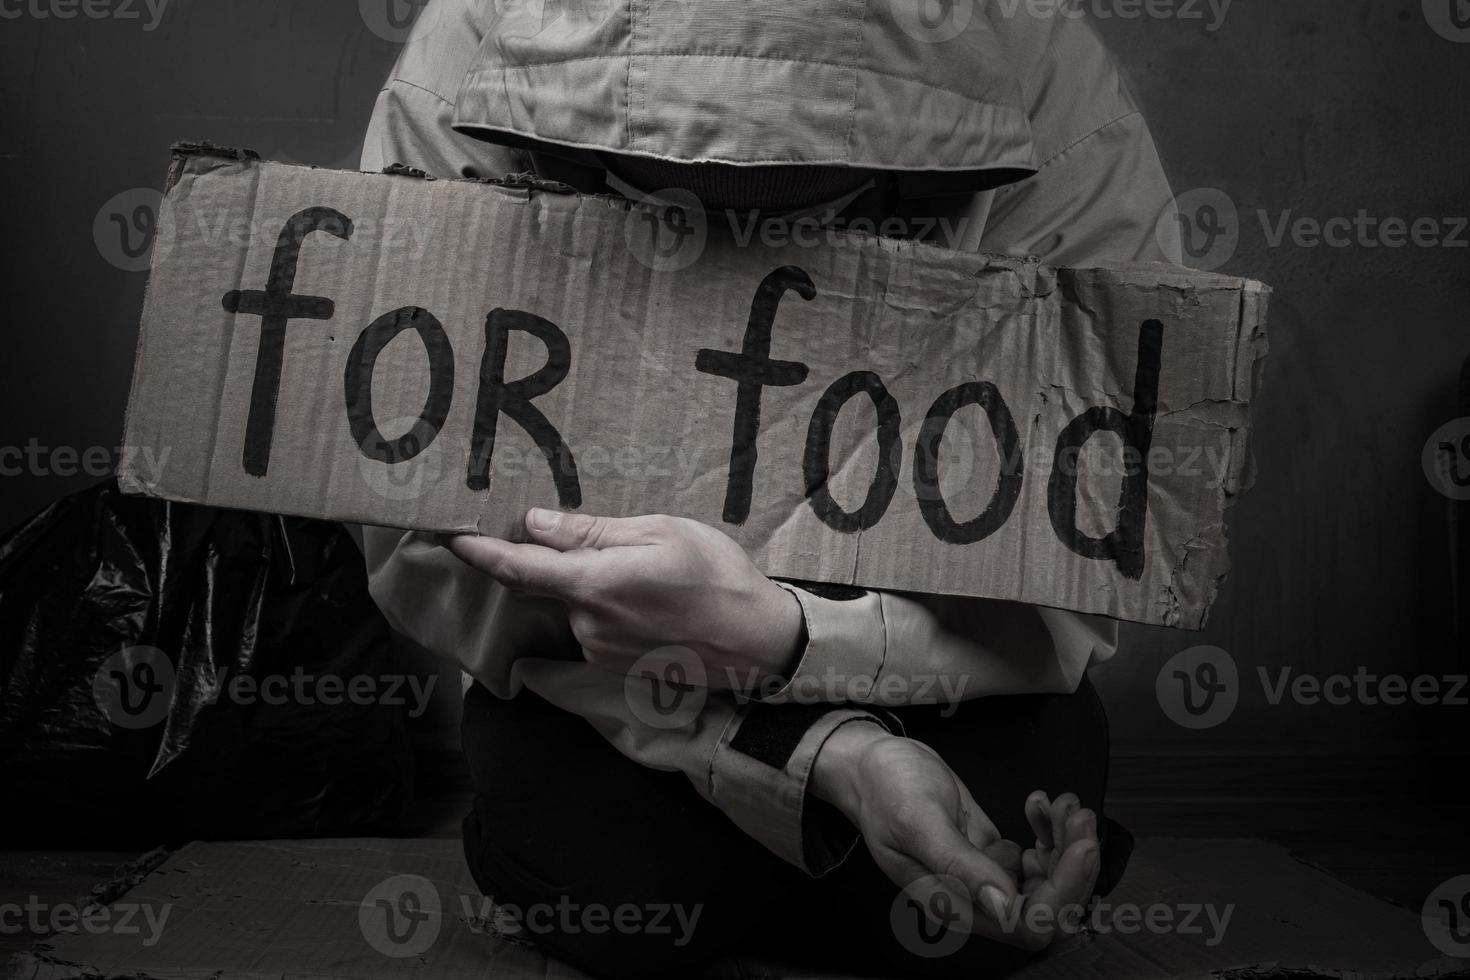 Homeless person asks for help with food photo